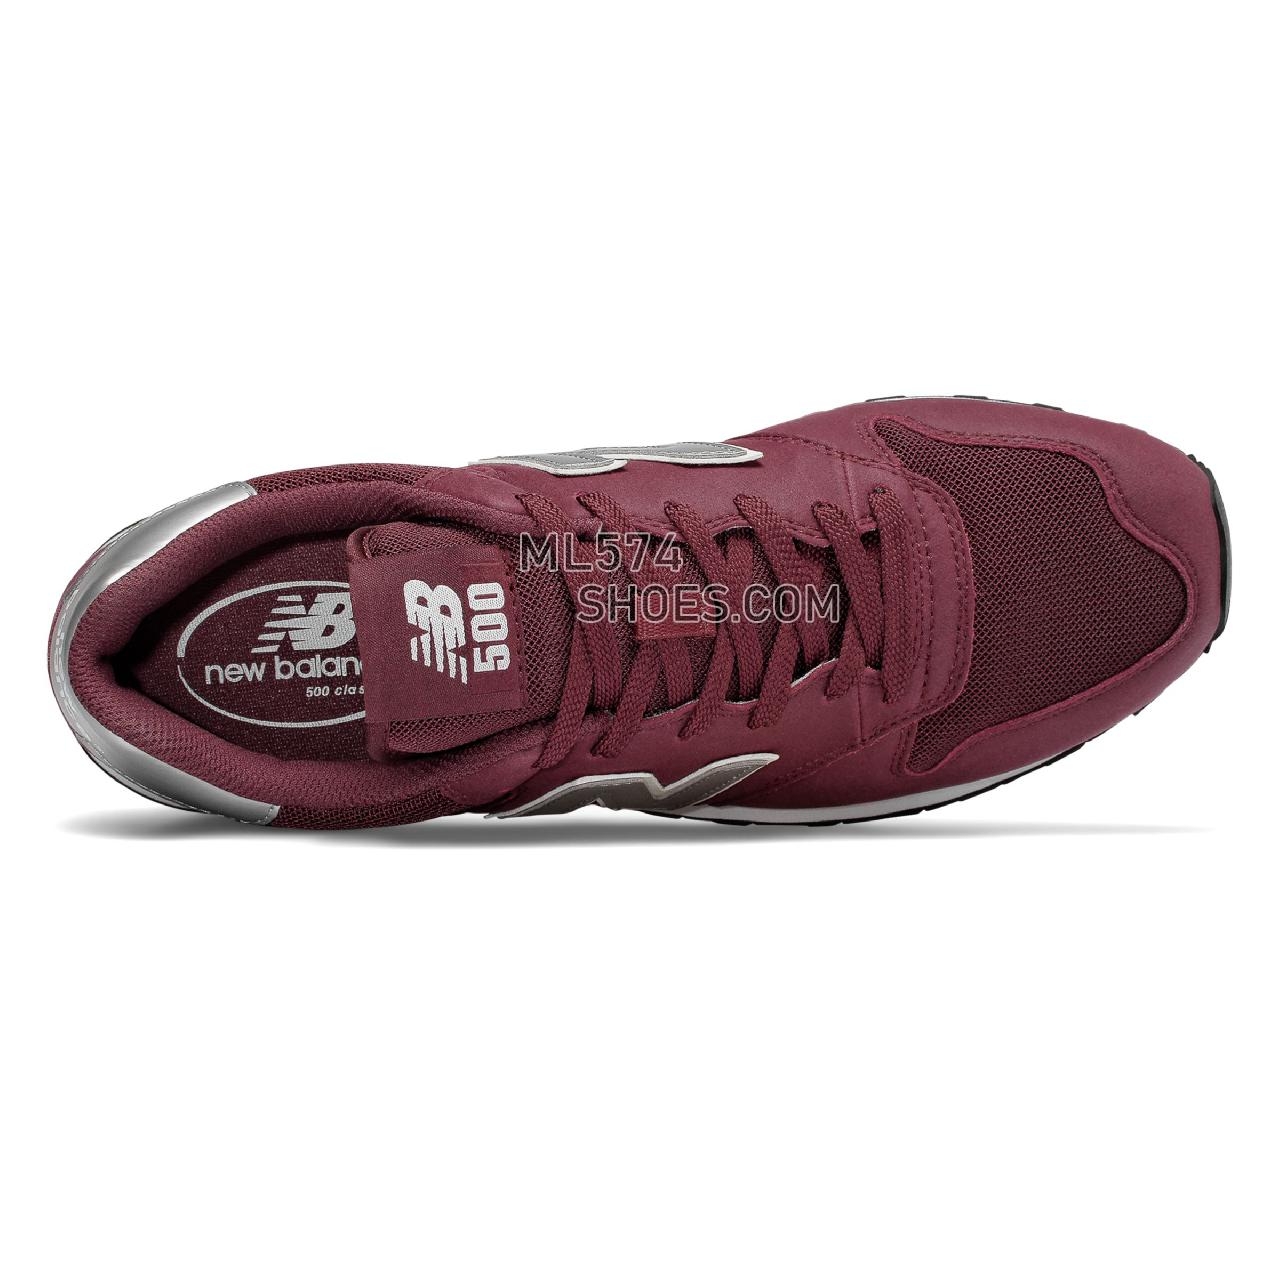 New Balance 500 Classic - Men's Classic Sneakers - Burgundy with Silver and White - GM500BUS